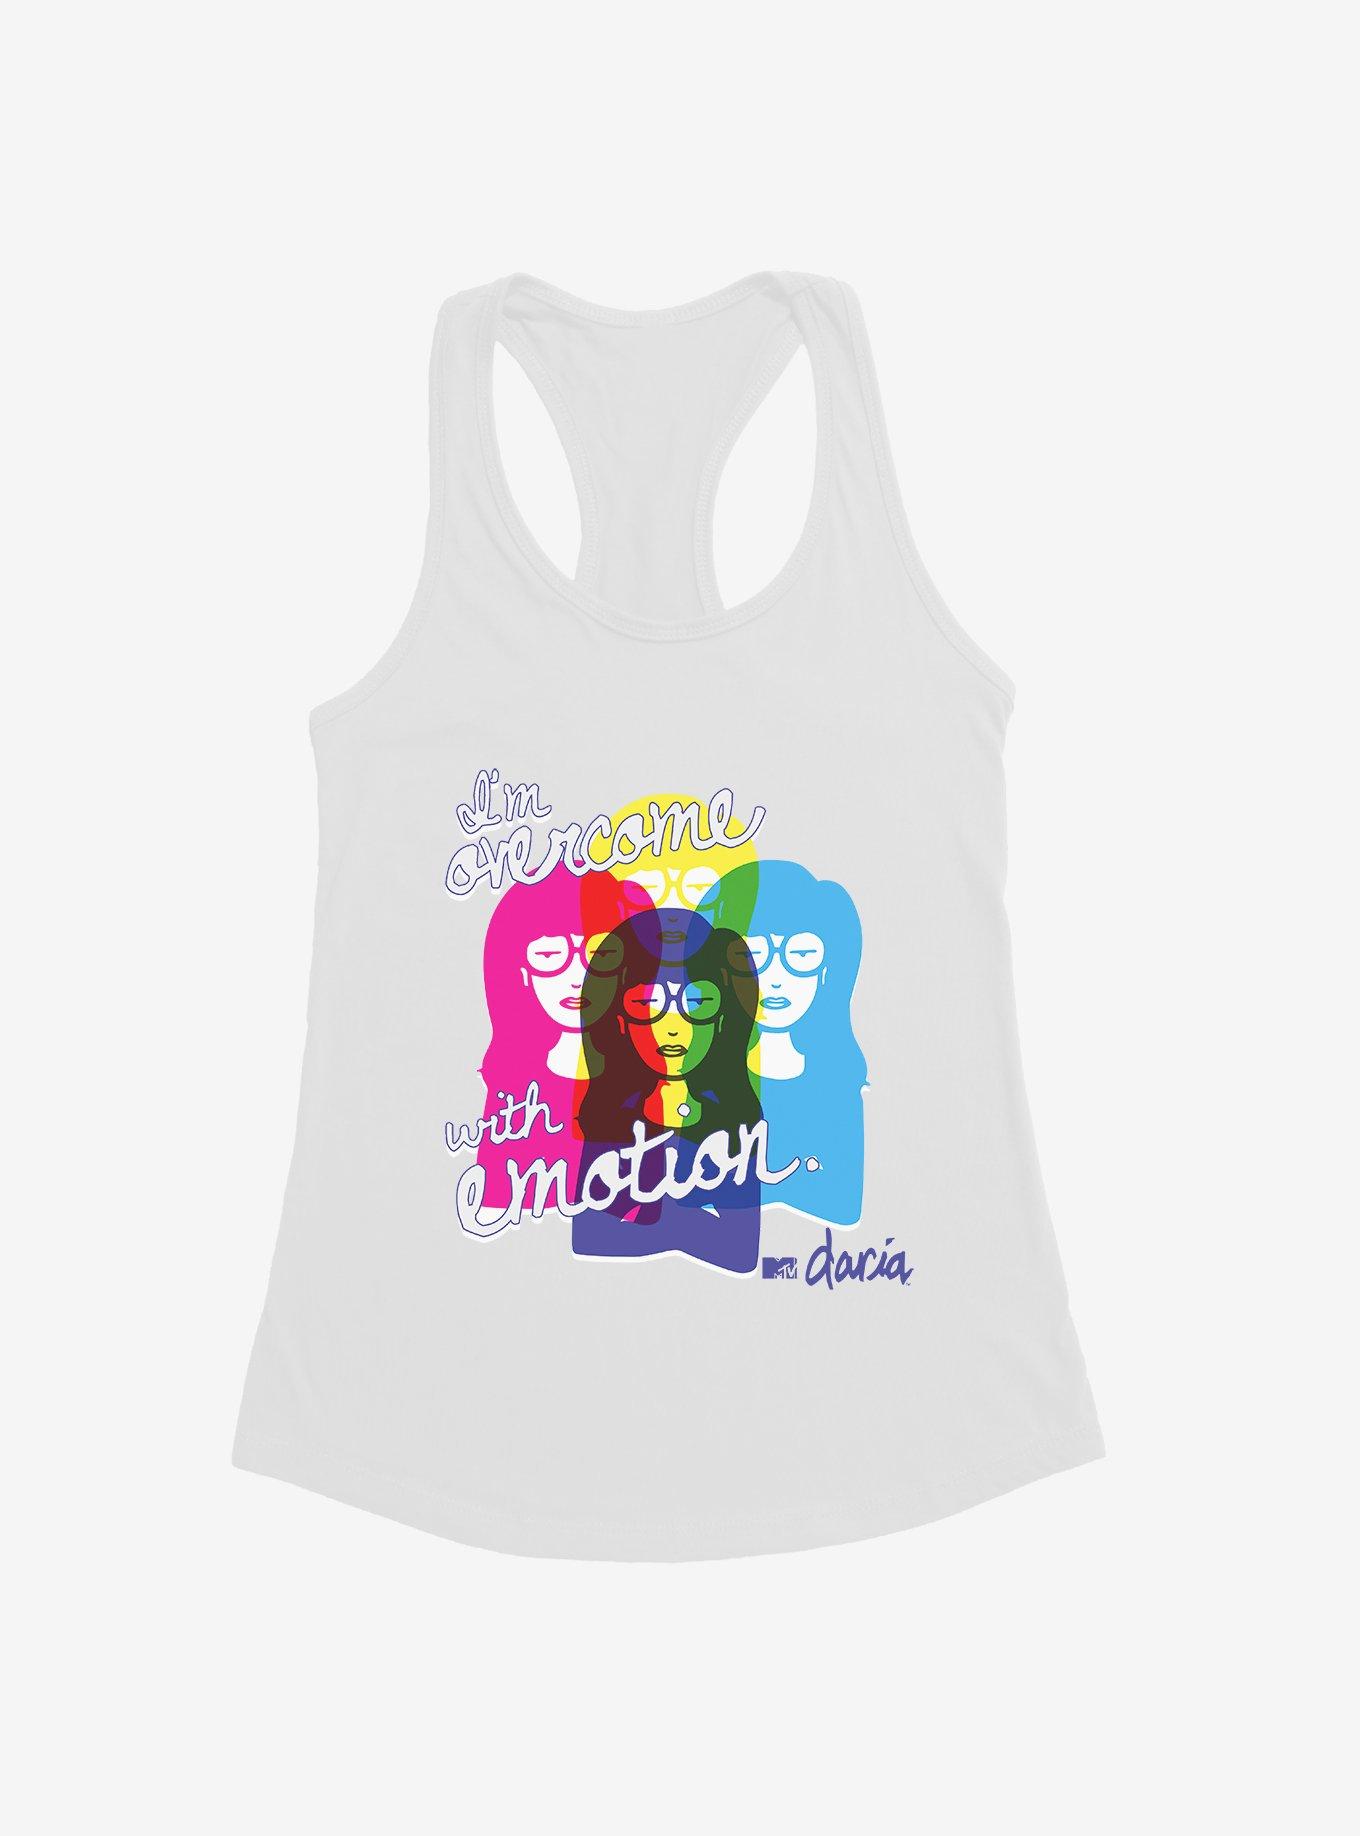 Daria Overcome With Emotion Girls Tank